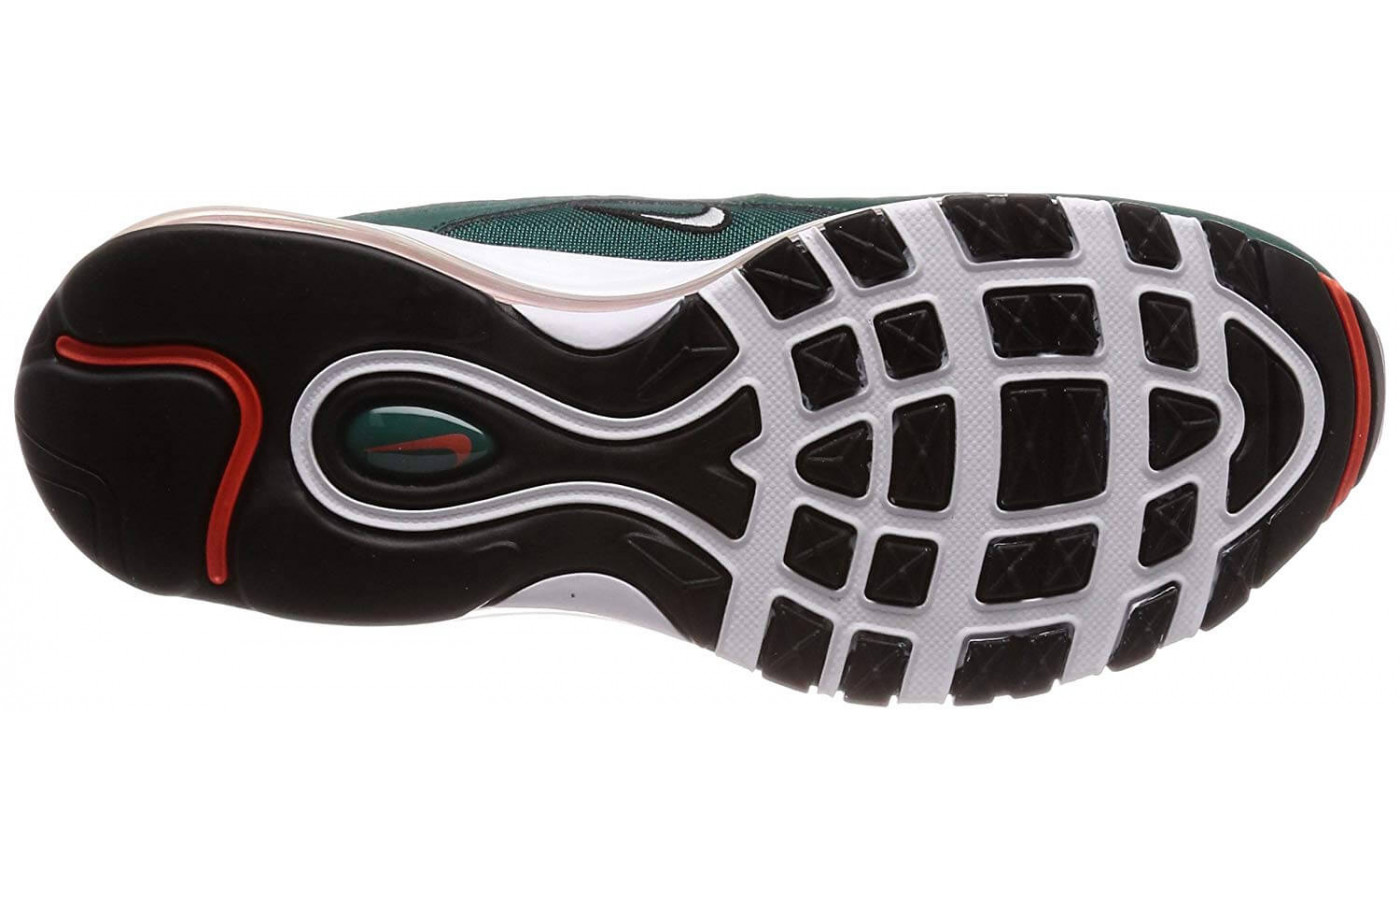 The Air Max 97's outsole is made from a basic rubber compound